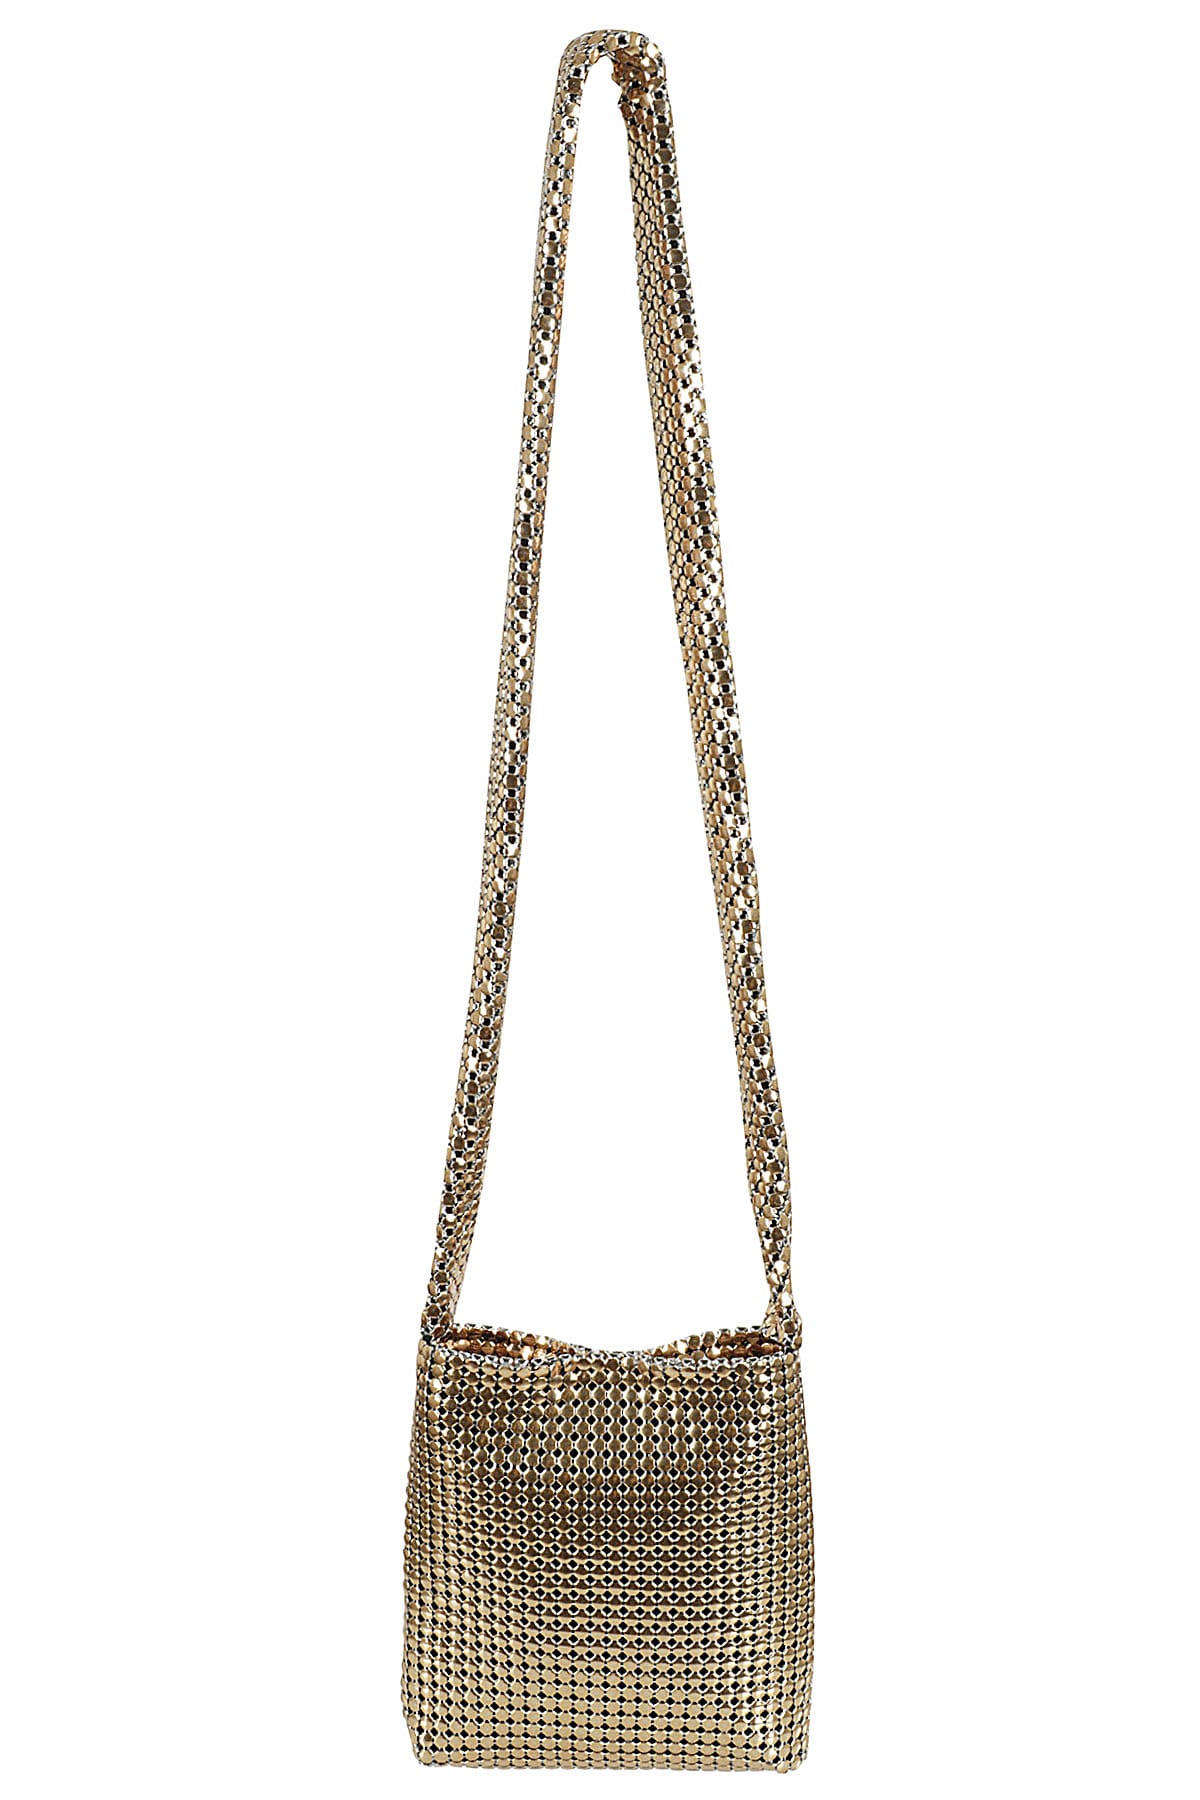 Shop Rabanne Sac Bandouliere In Gold